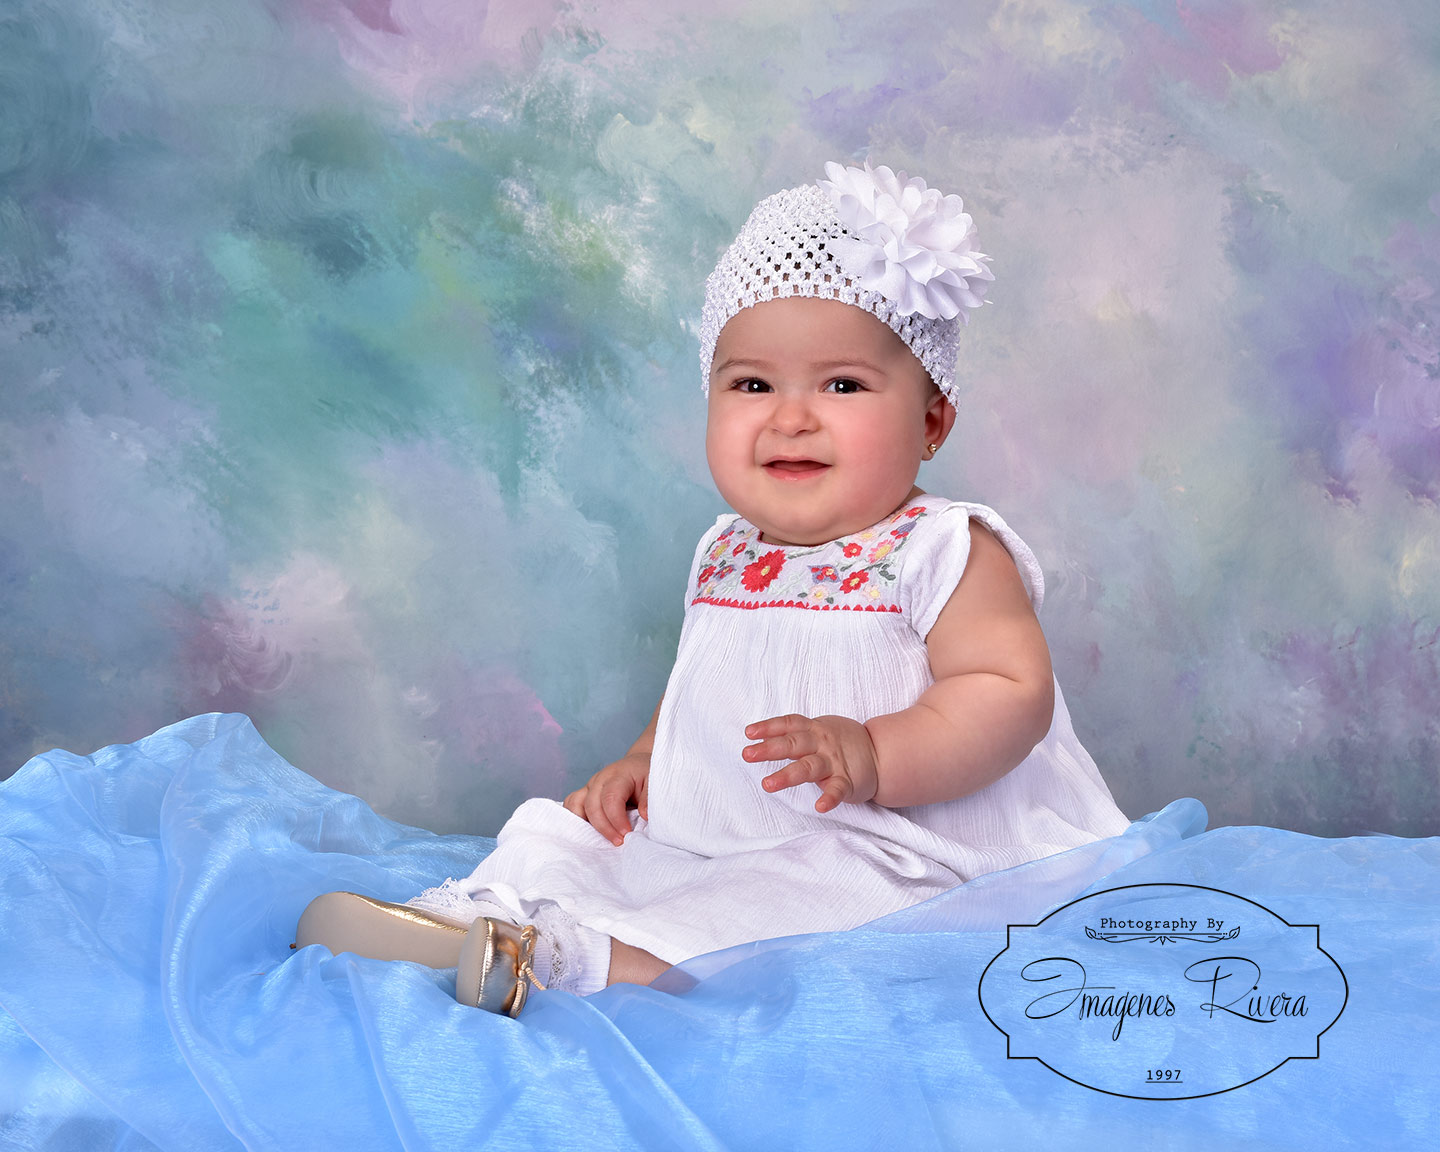 ♥ Nathaly´s 6 months | Children photography Miami Imagenes Rivera ♥